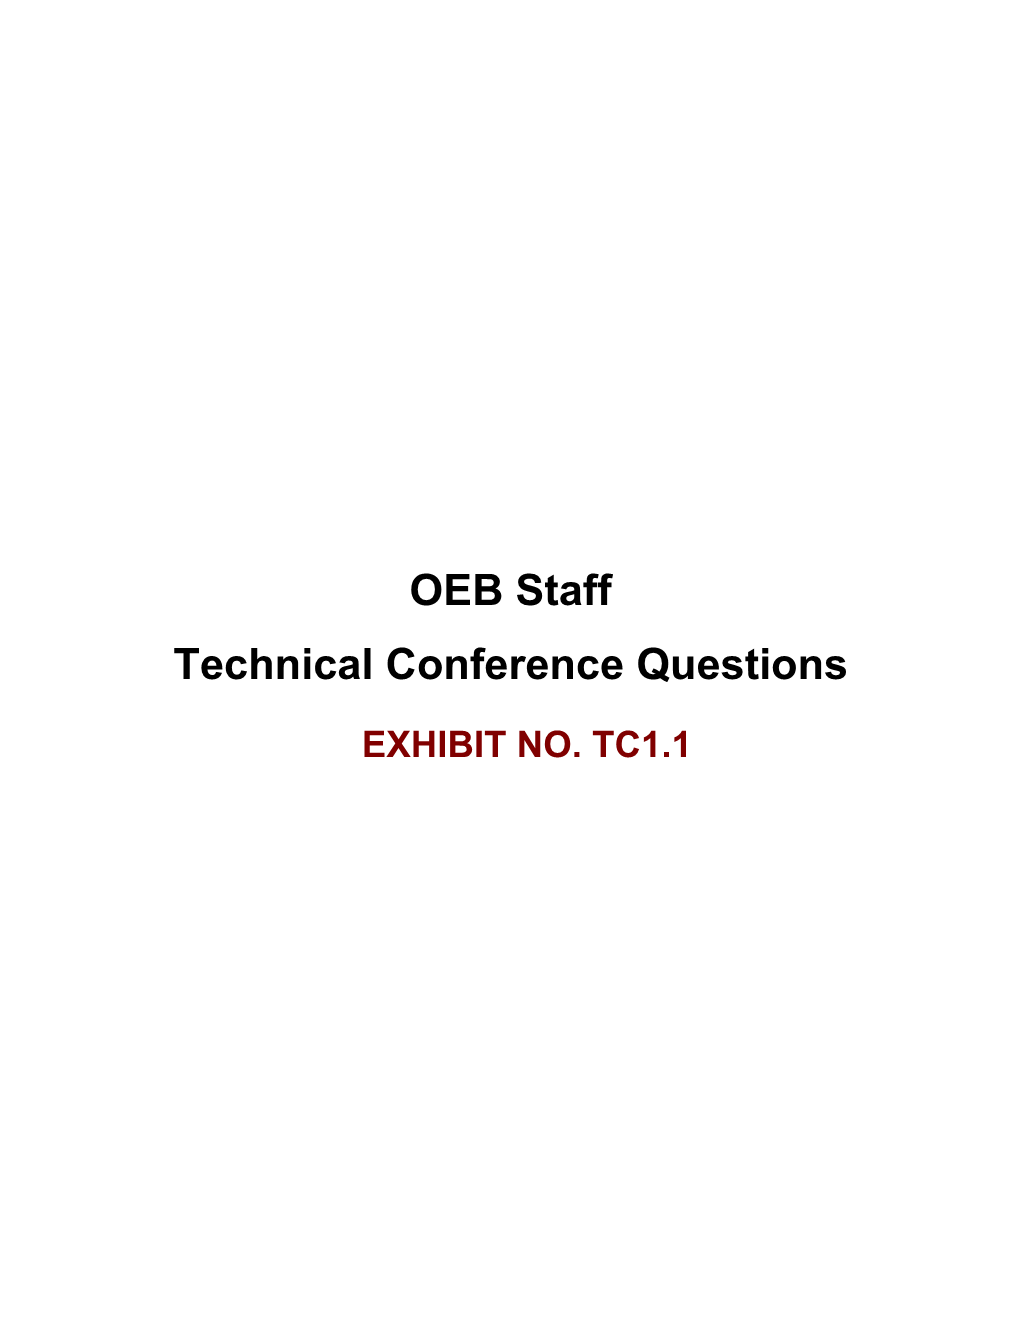 OEB Staff Technical Conference Questions